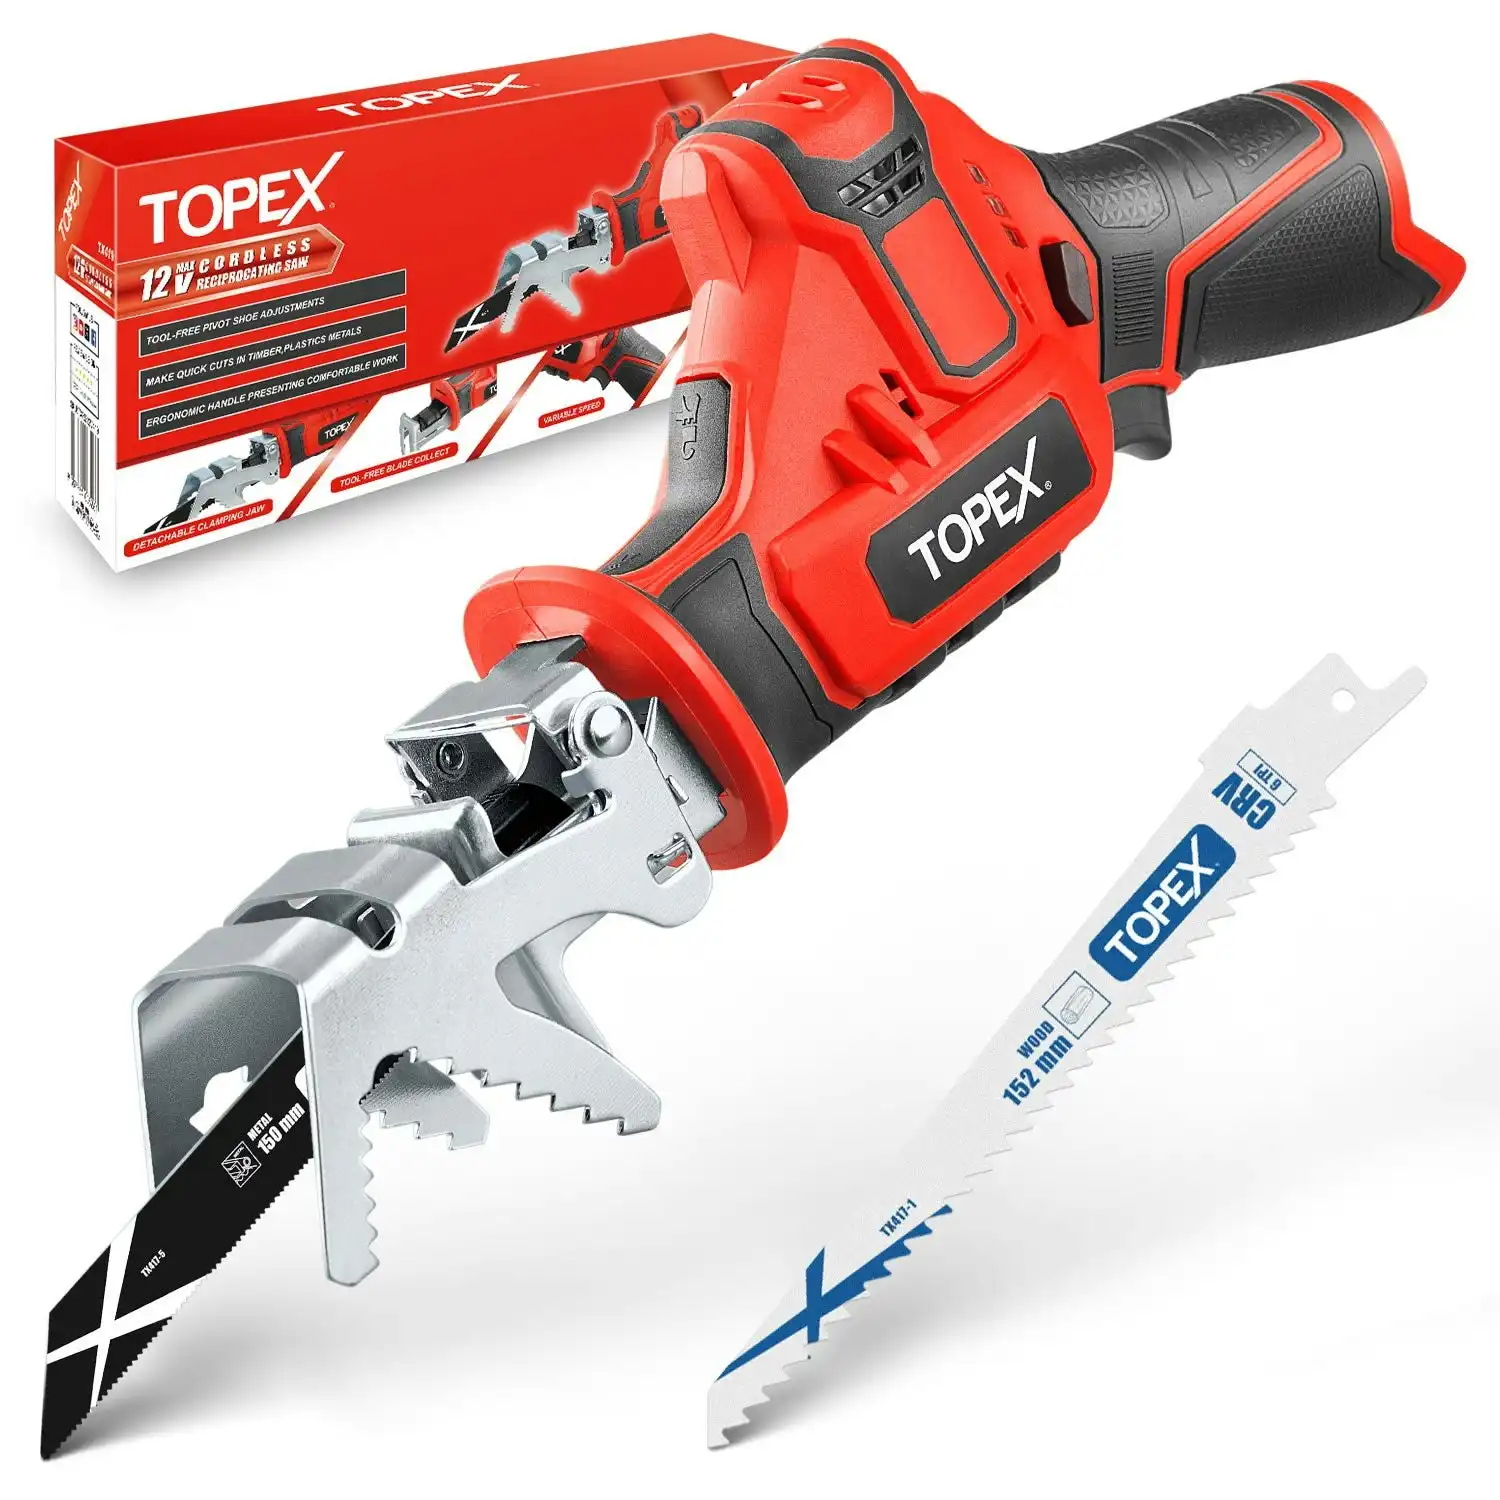 Topex 12V Cordless Reciprocating Saw w/ 2 Saw Blades & Clamping Claw Cutting Depth 65 mm Skin Only without Battery